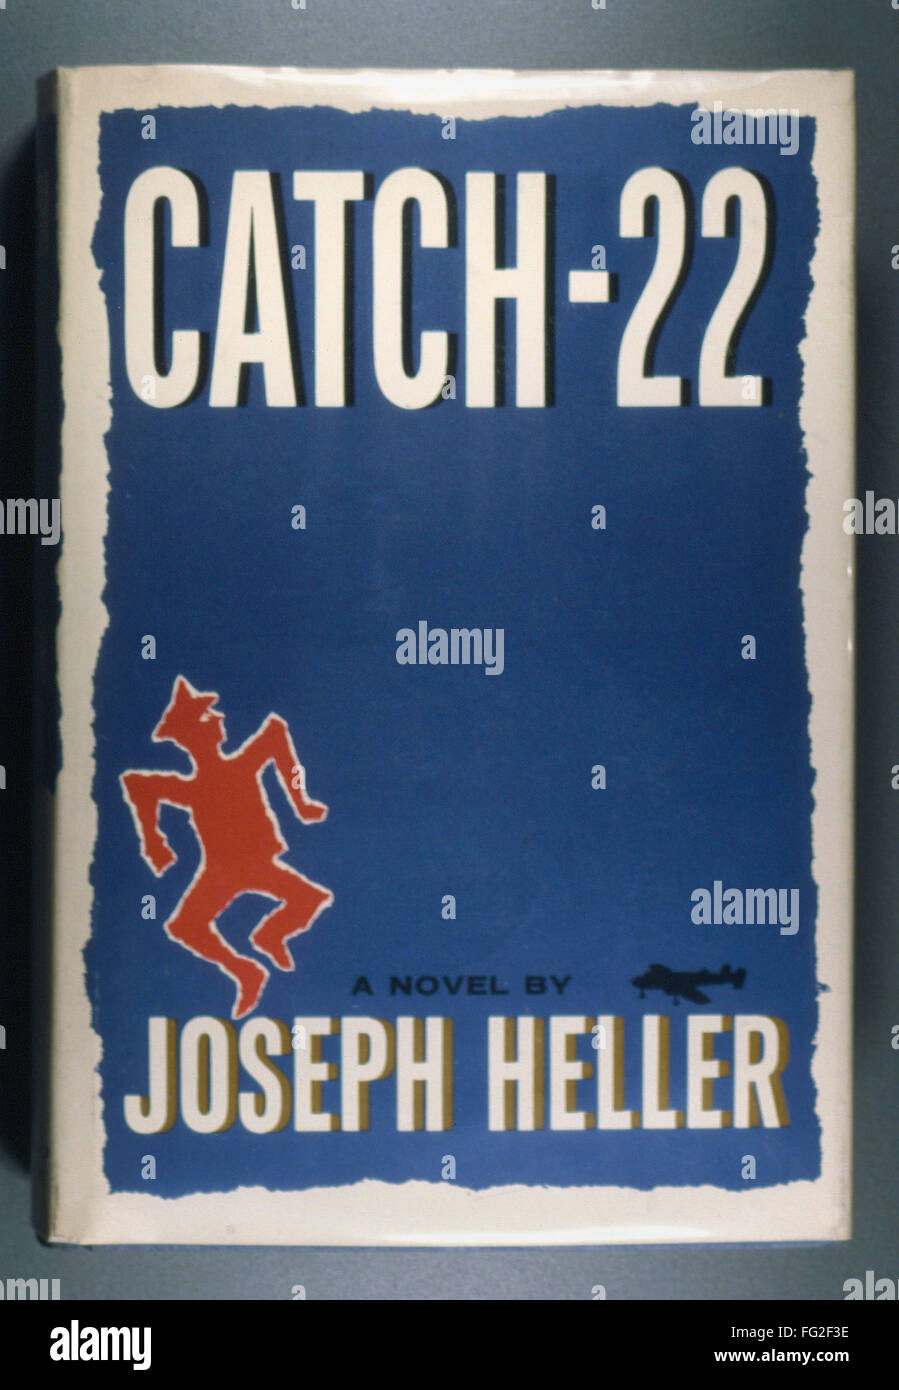 HELLER: CATCH-22, 1961. /nFirst edition of 'Catch-22' by Joseph Heller, 1961. Cover designed by Paul Bacon. Stock Photo